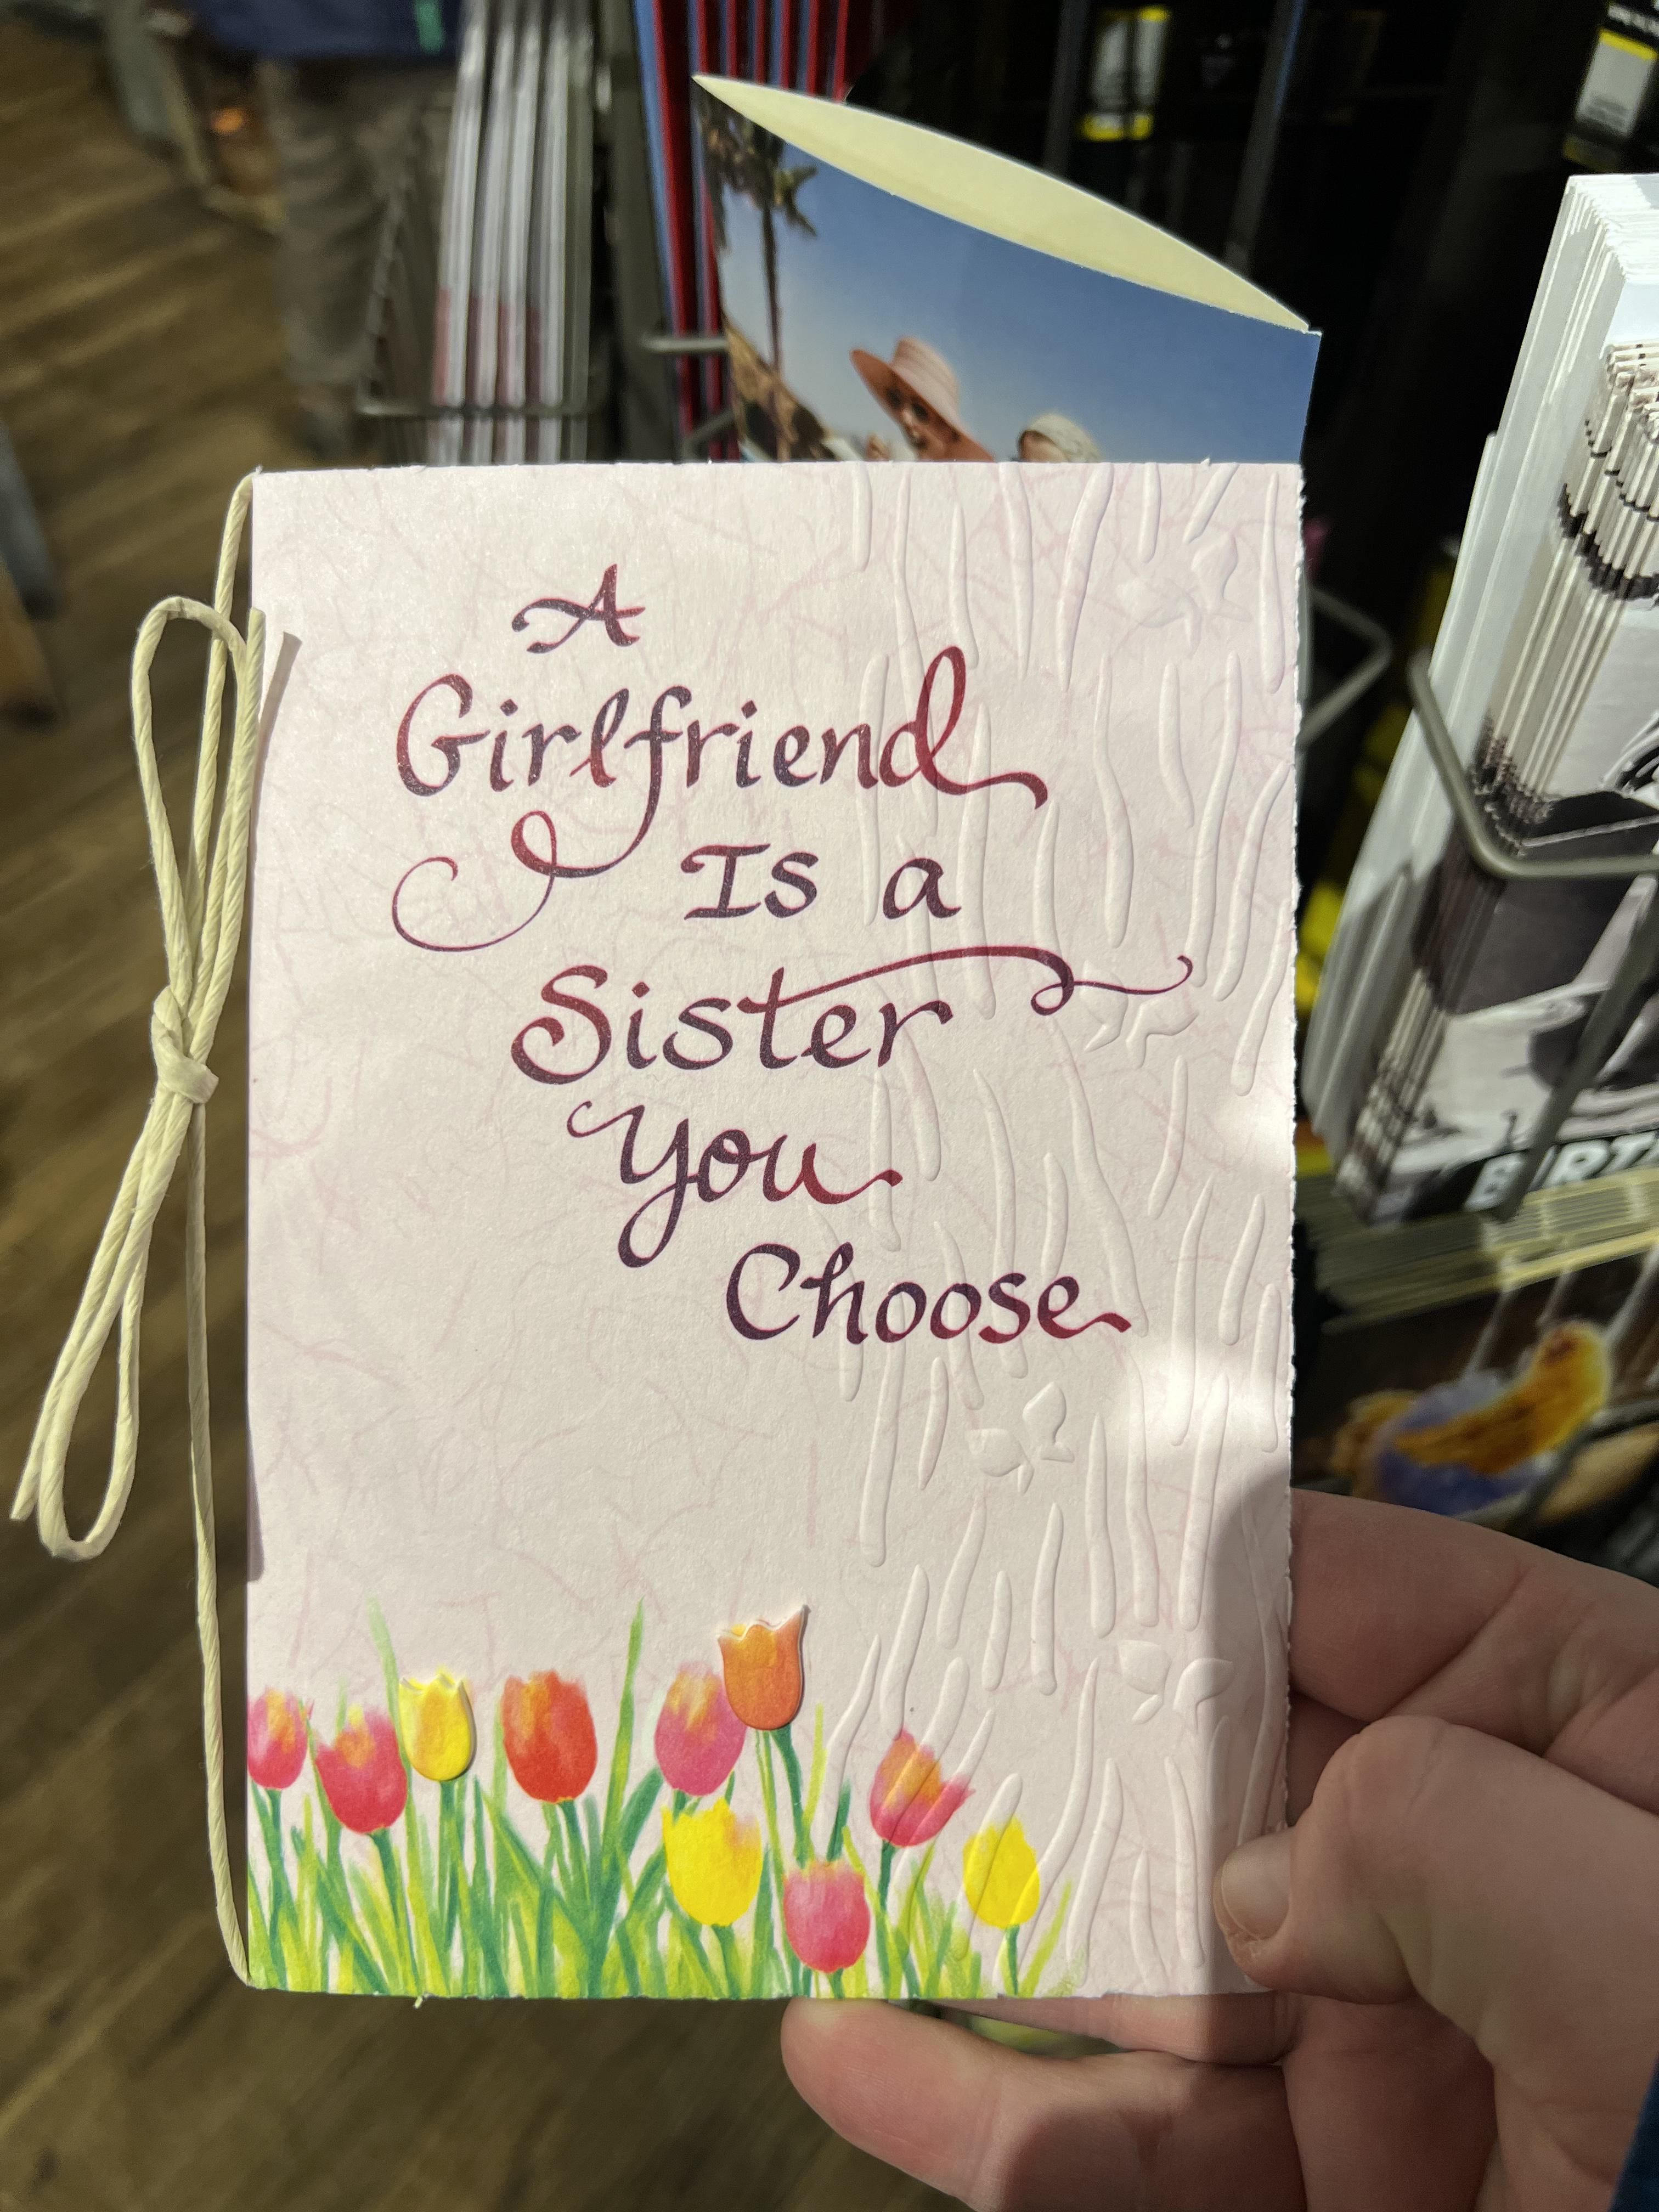 I was really confused by this card at first